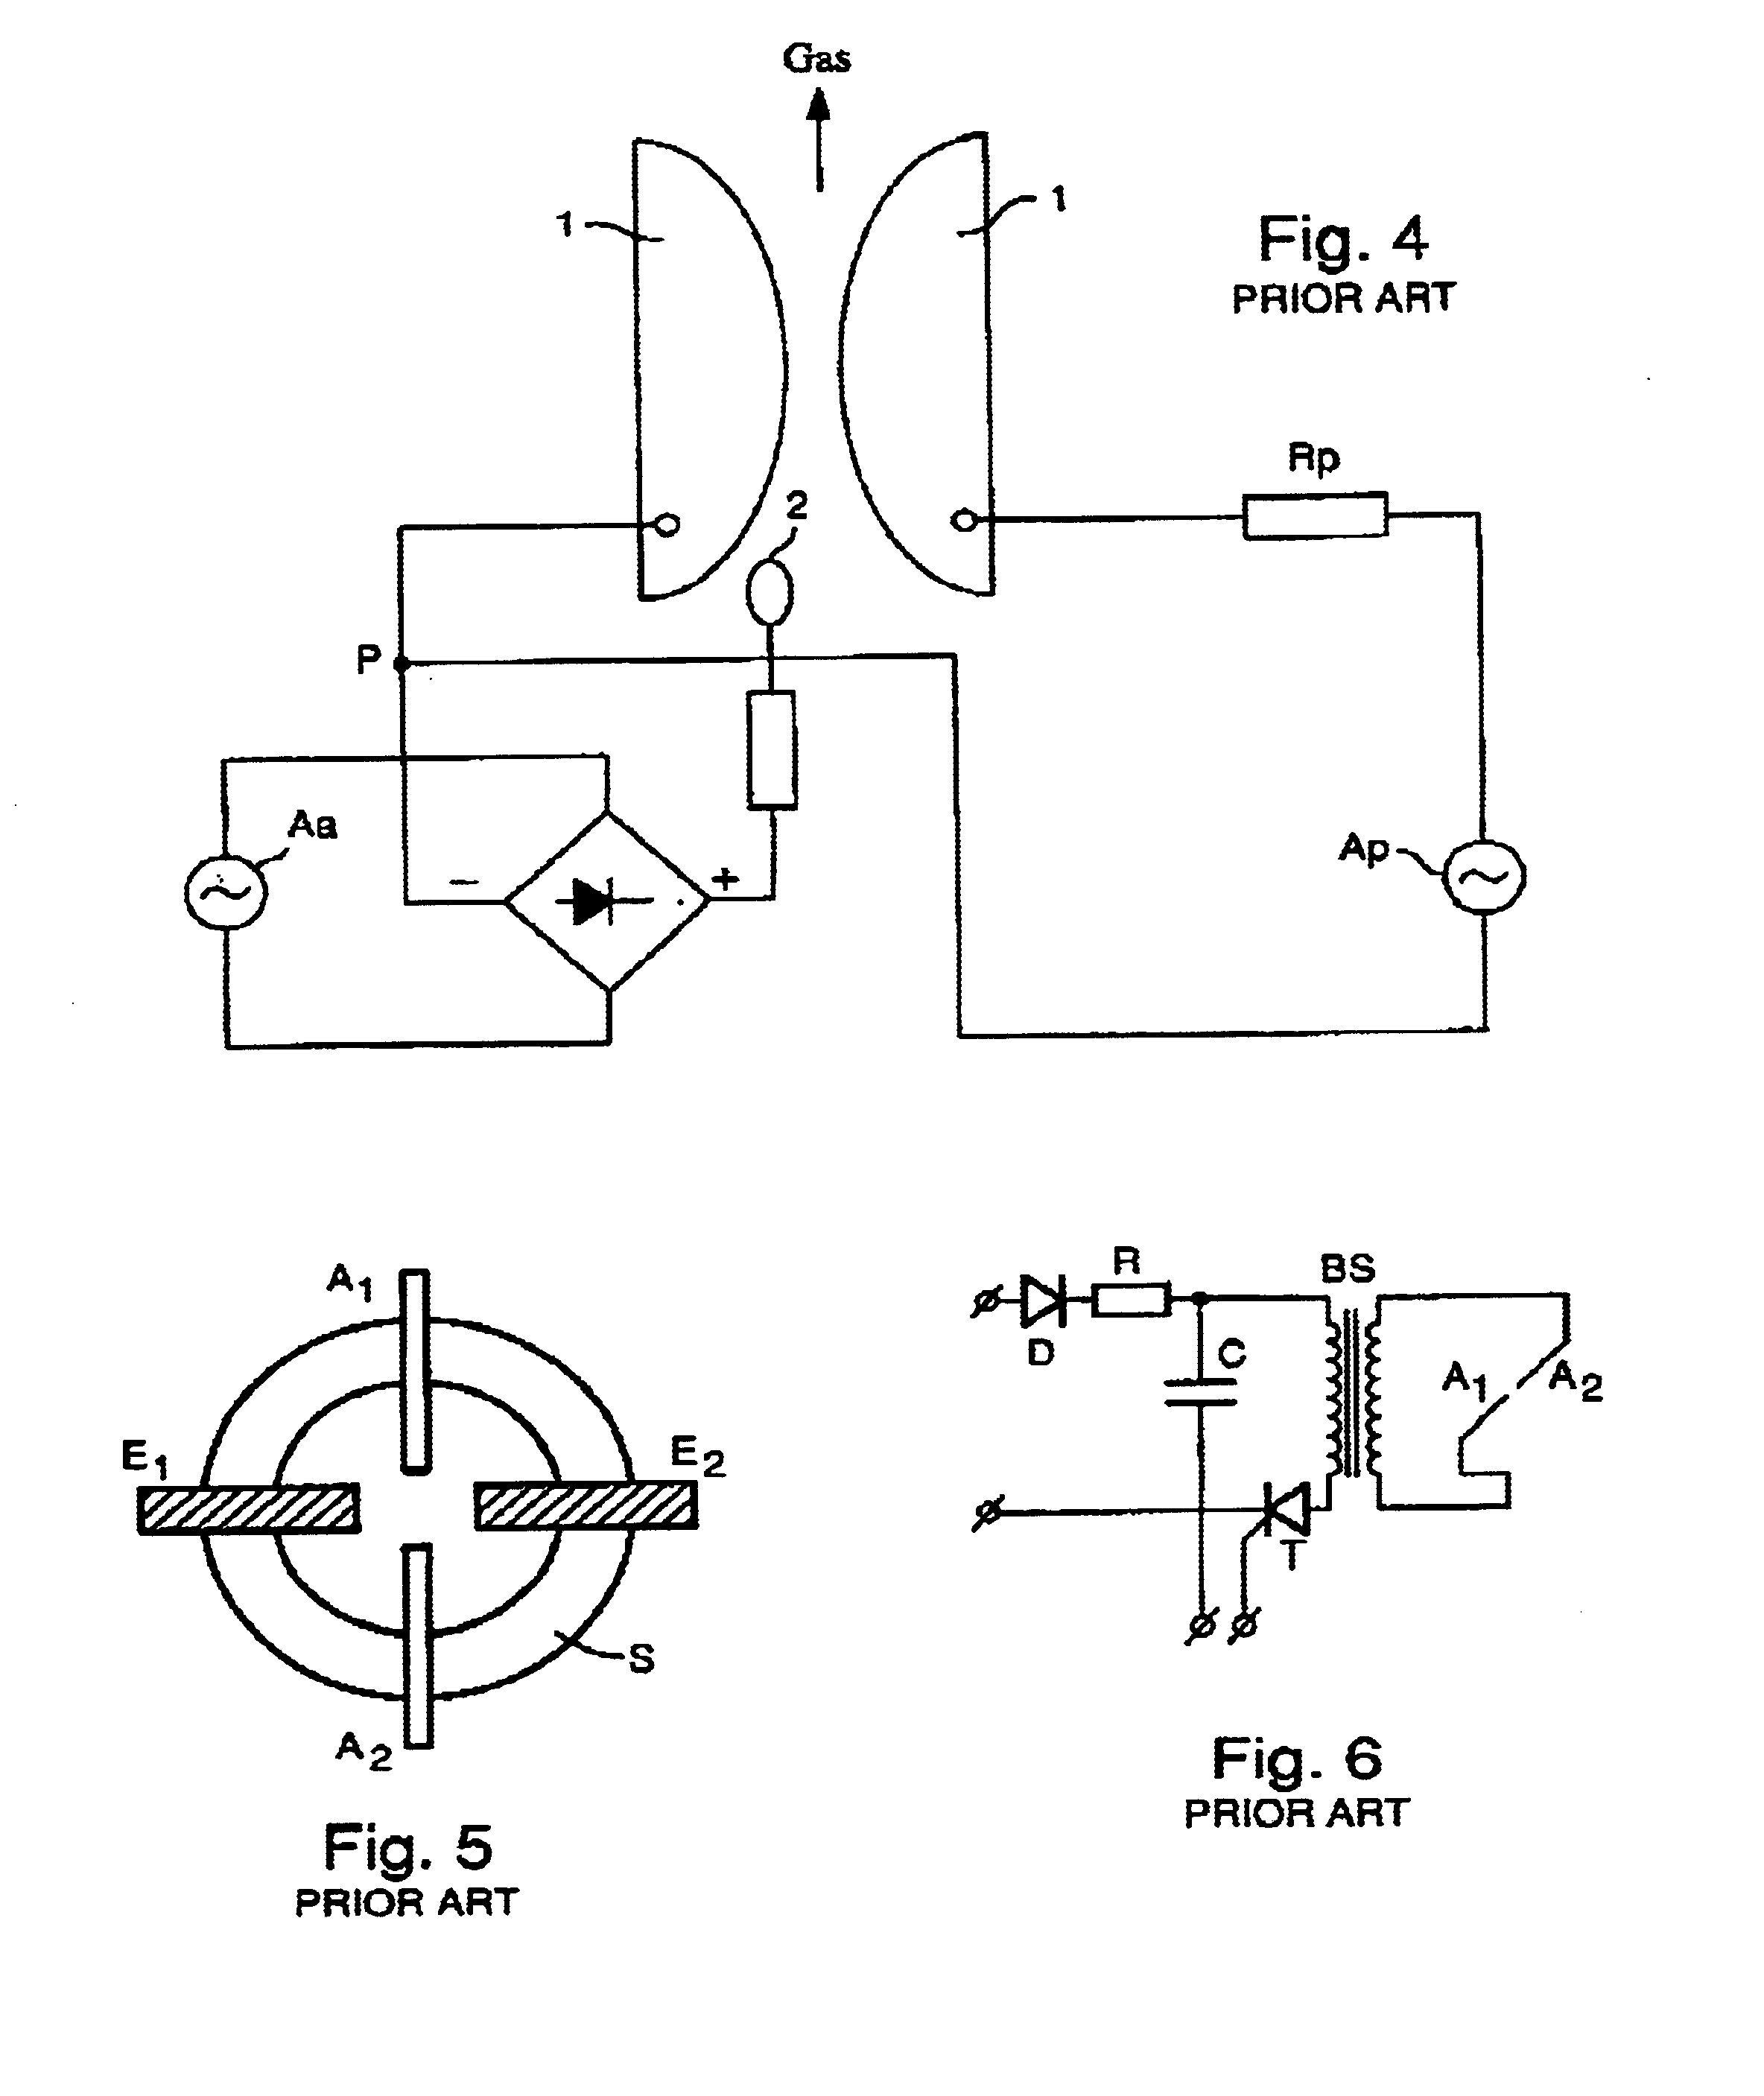 System and method for ignition and reignition of unstable electrical discharges